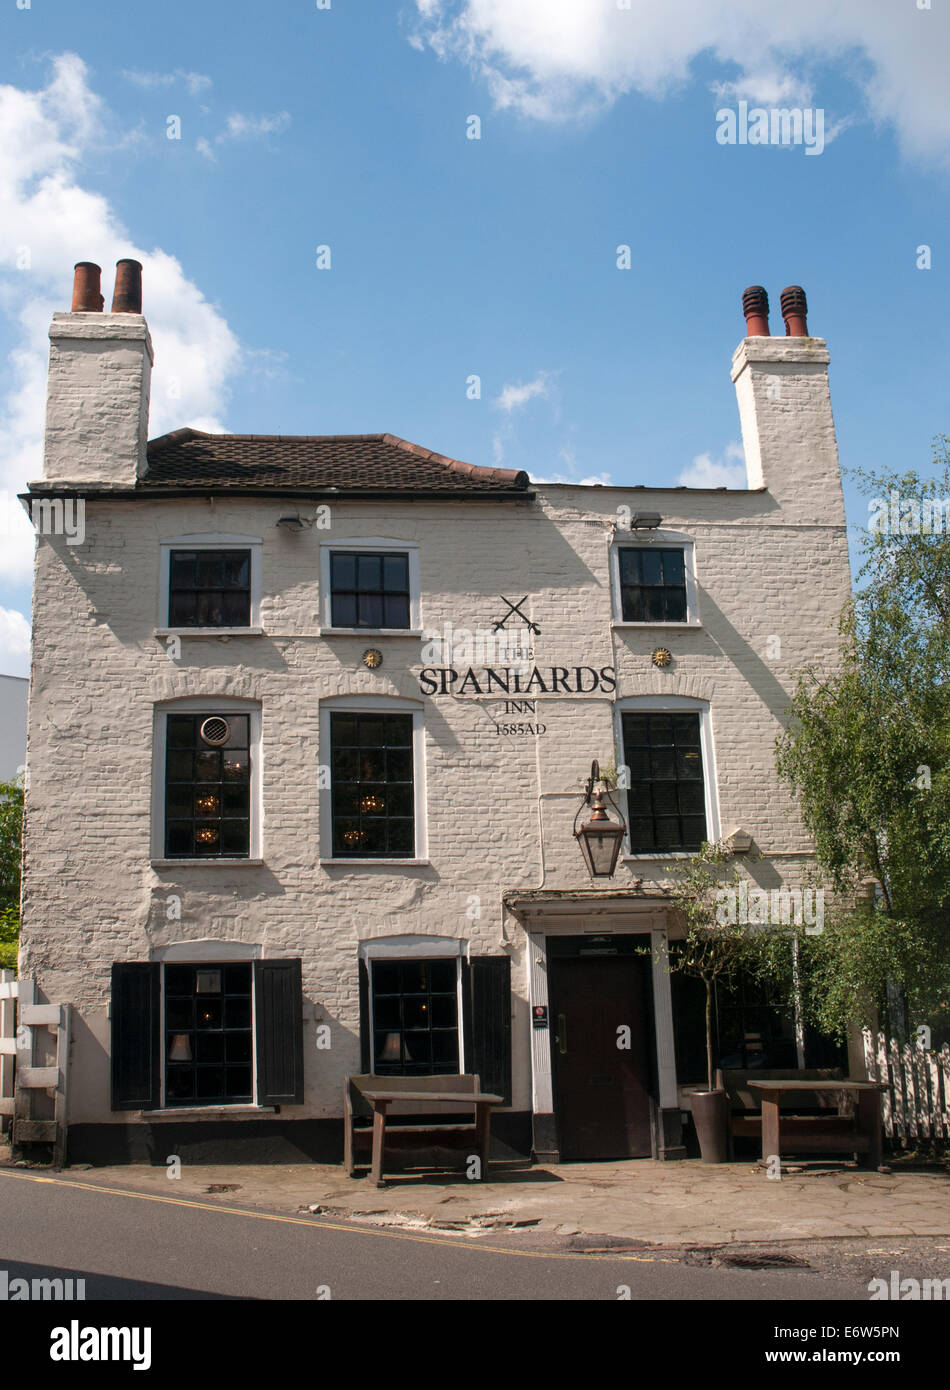 The Spaniards Inn, dating from 1585, at Hampstead Heath, London Stock Photo